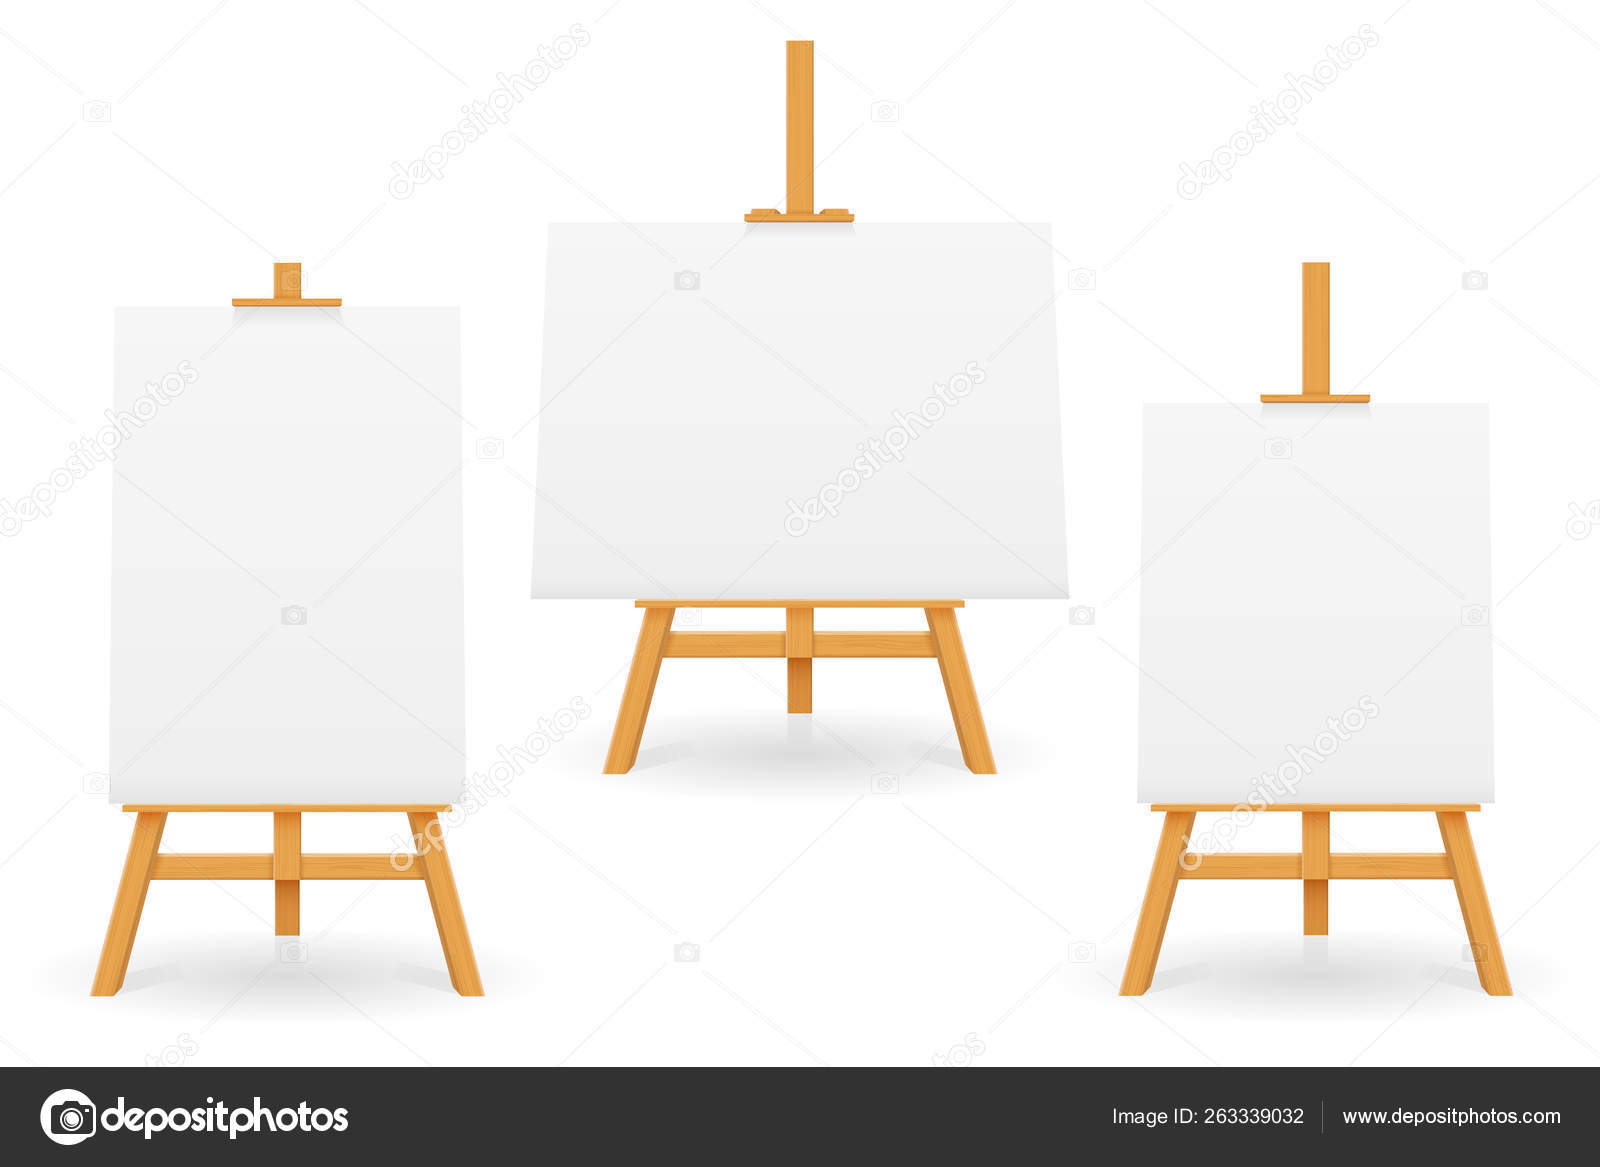 Wooden easel for painting and drawing with a blank sheet of pape